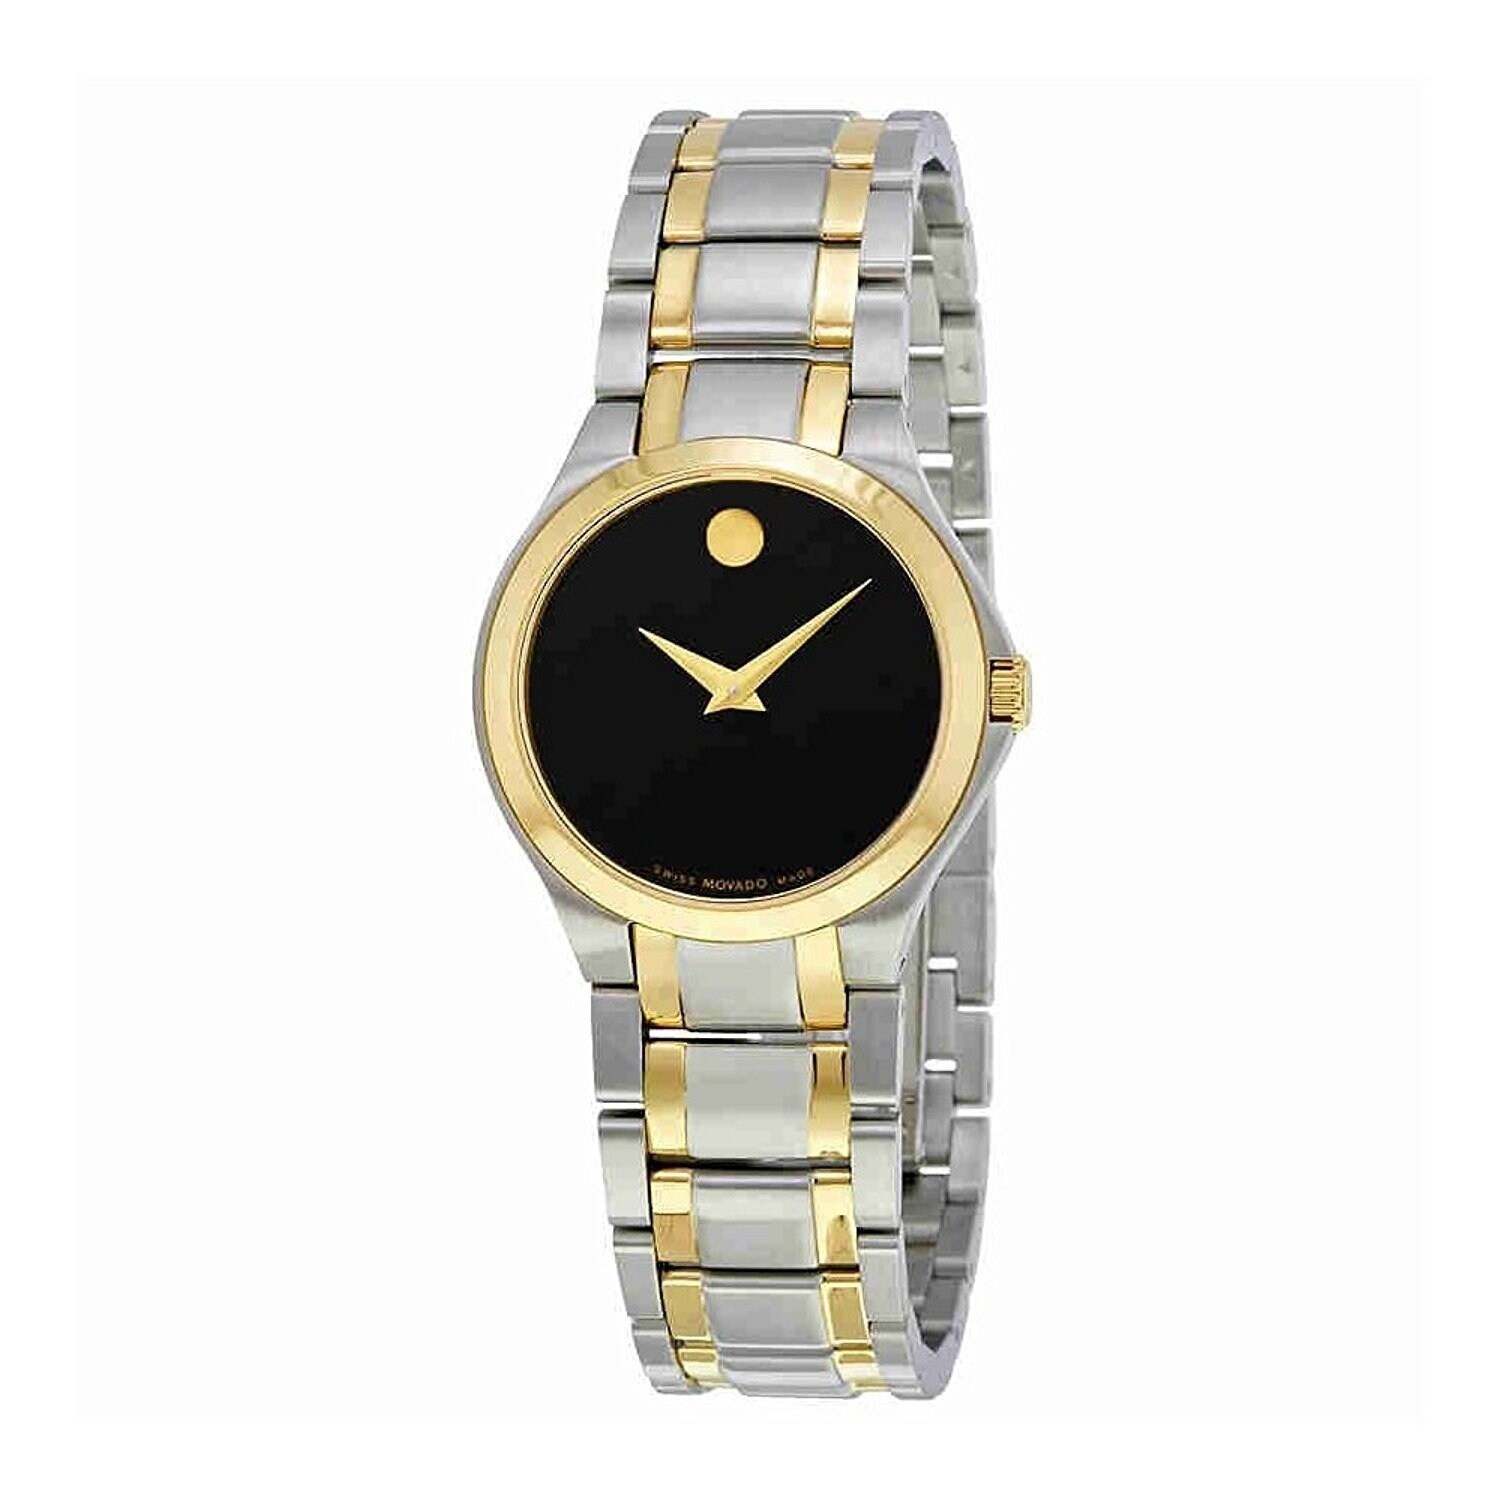 Movado Women's 'Collection' Two-Tone Stainless Steel Watch